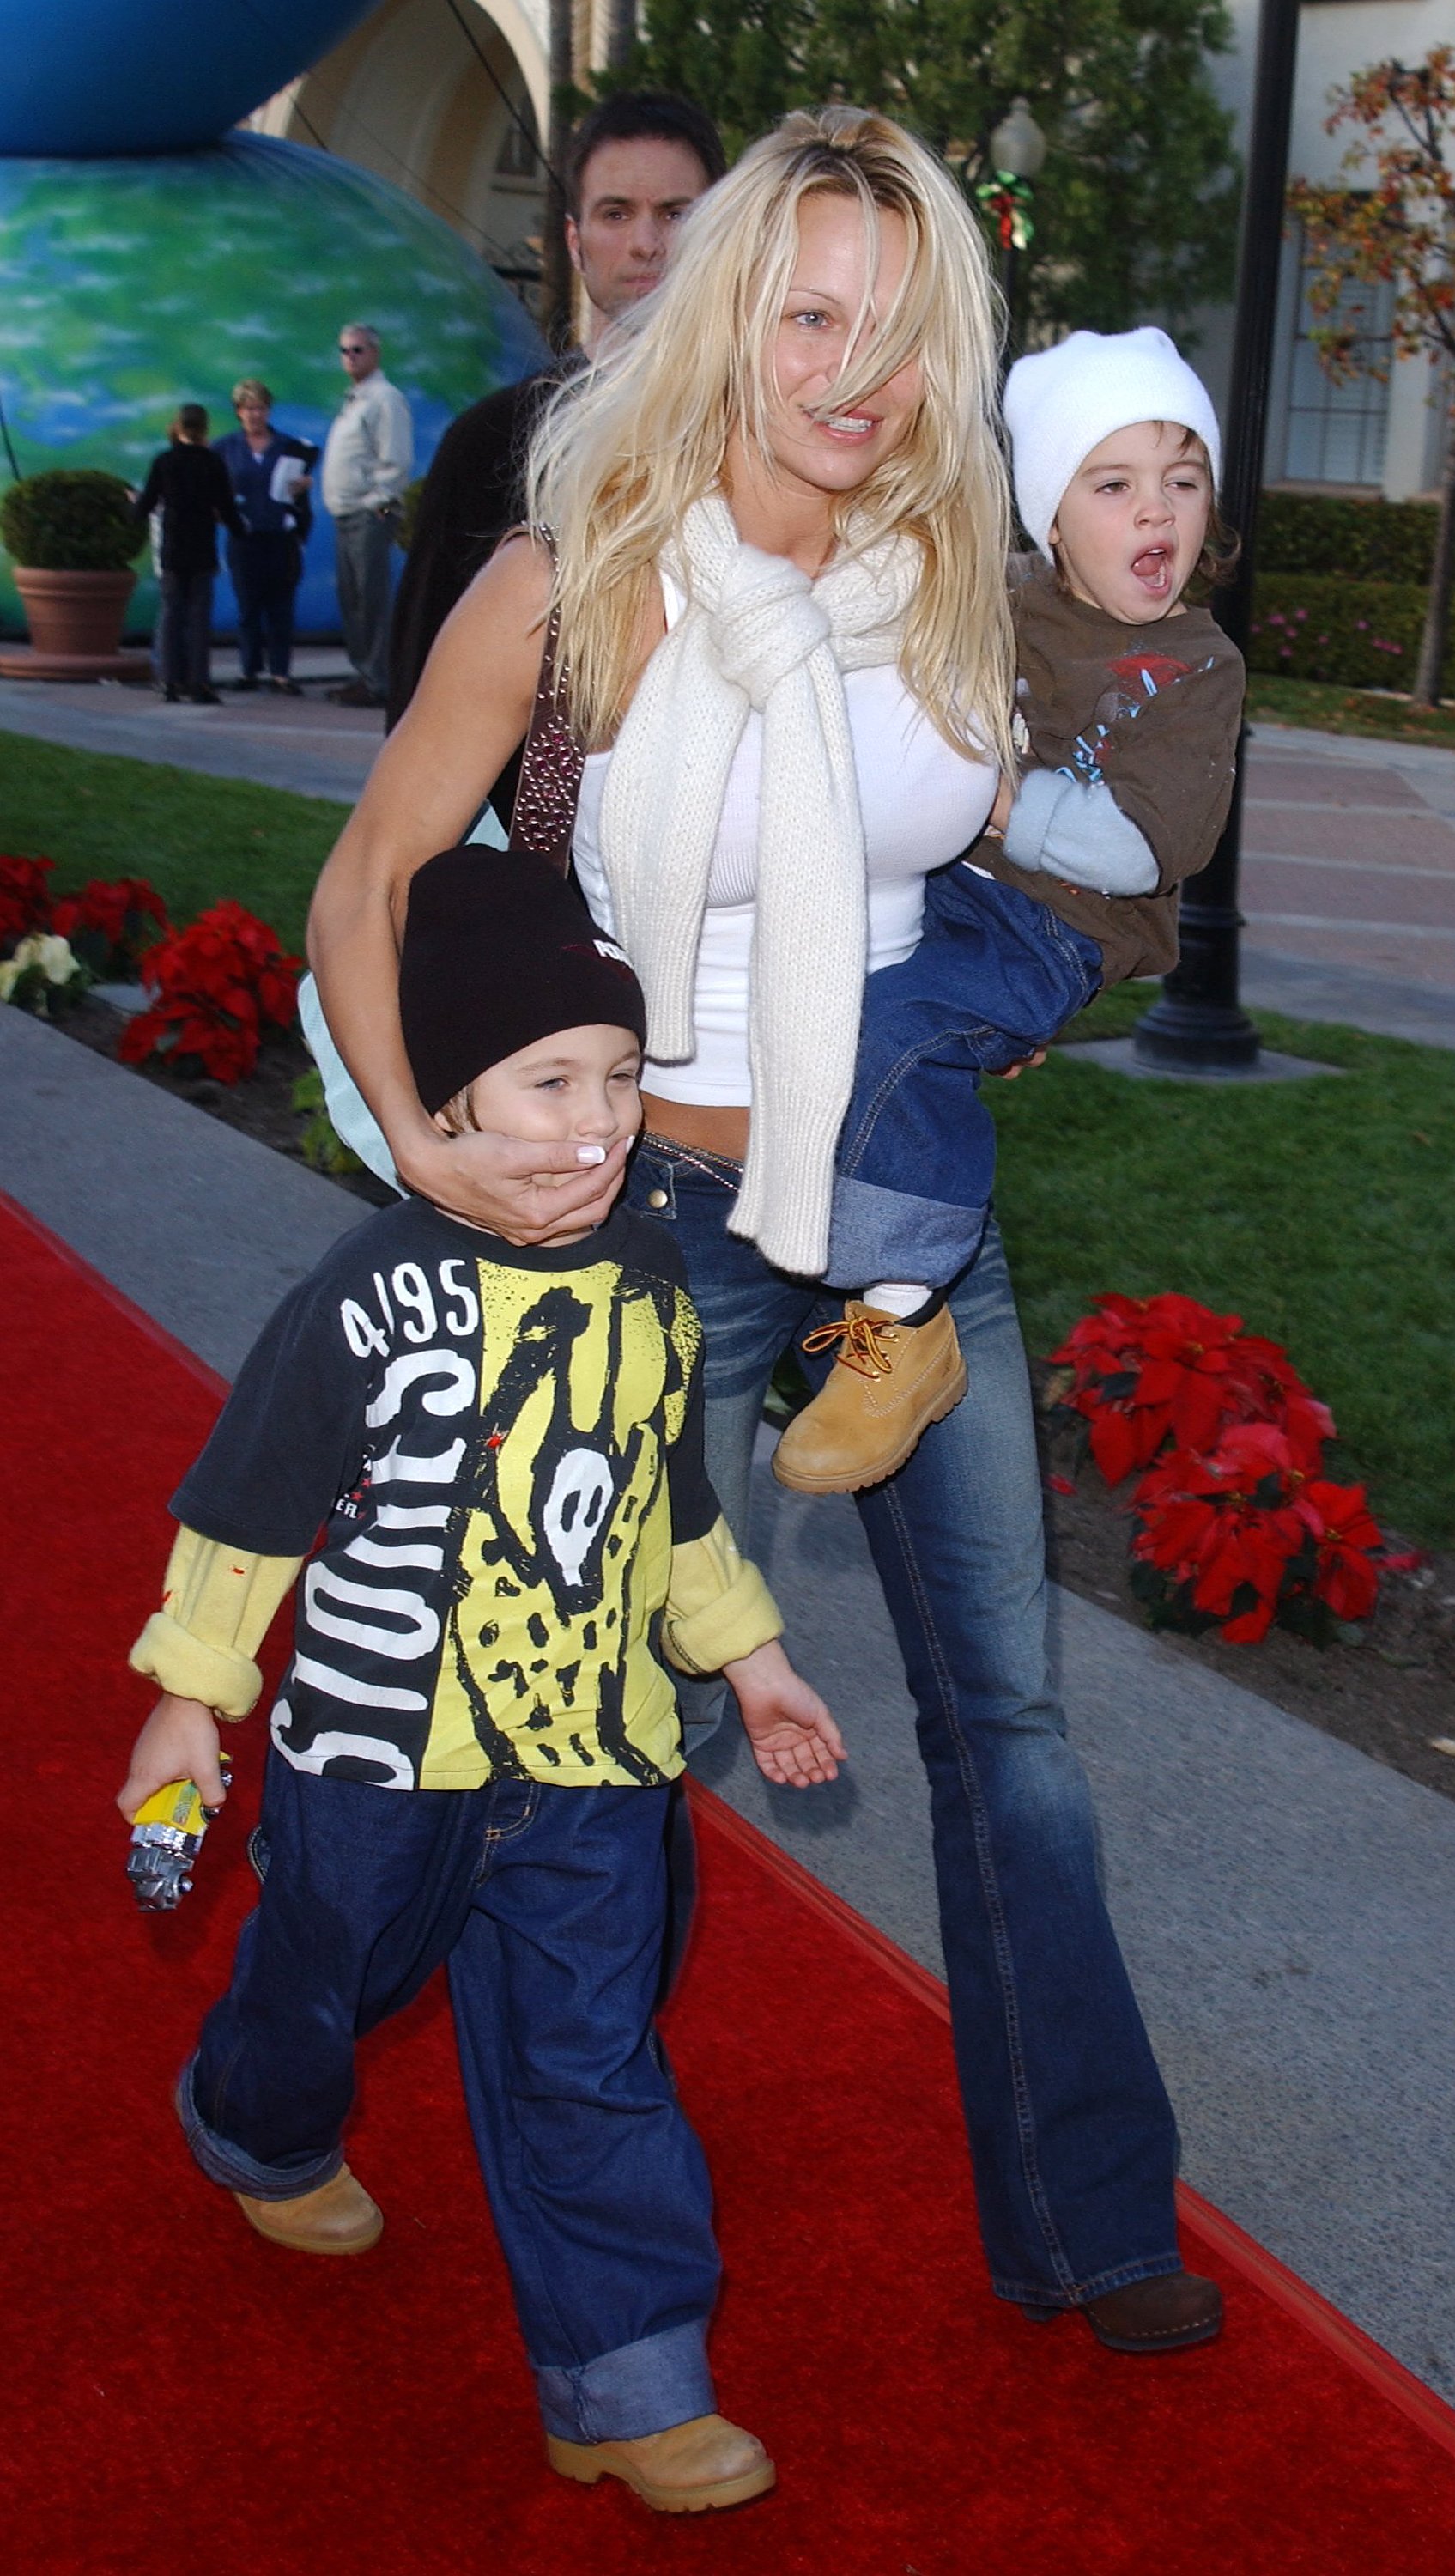 Pamela Anderson walking the red carpet with sons Dylan and Brandon at the Premiere of Jimmy Neutron on December 9, 2001 in Hollywood, CA. | Photo by Vince Bucci/Getty Images